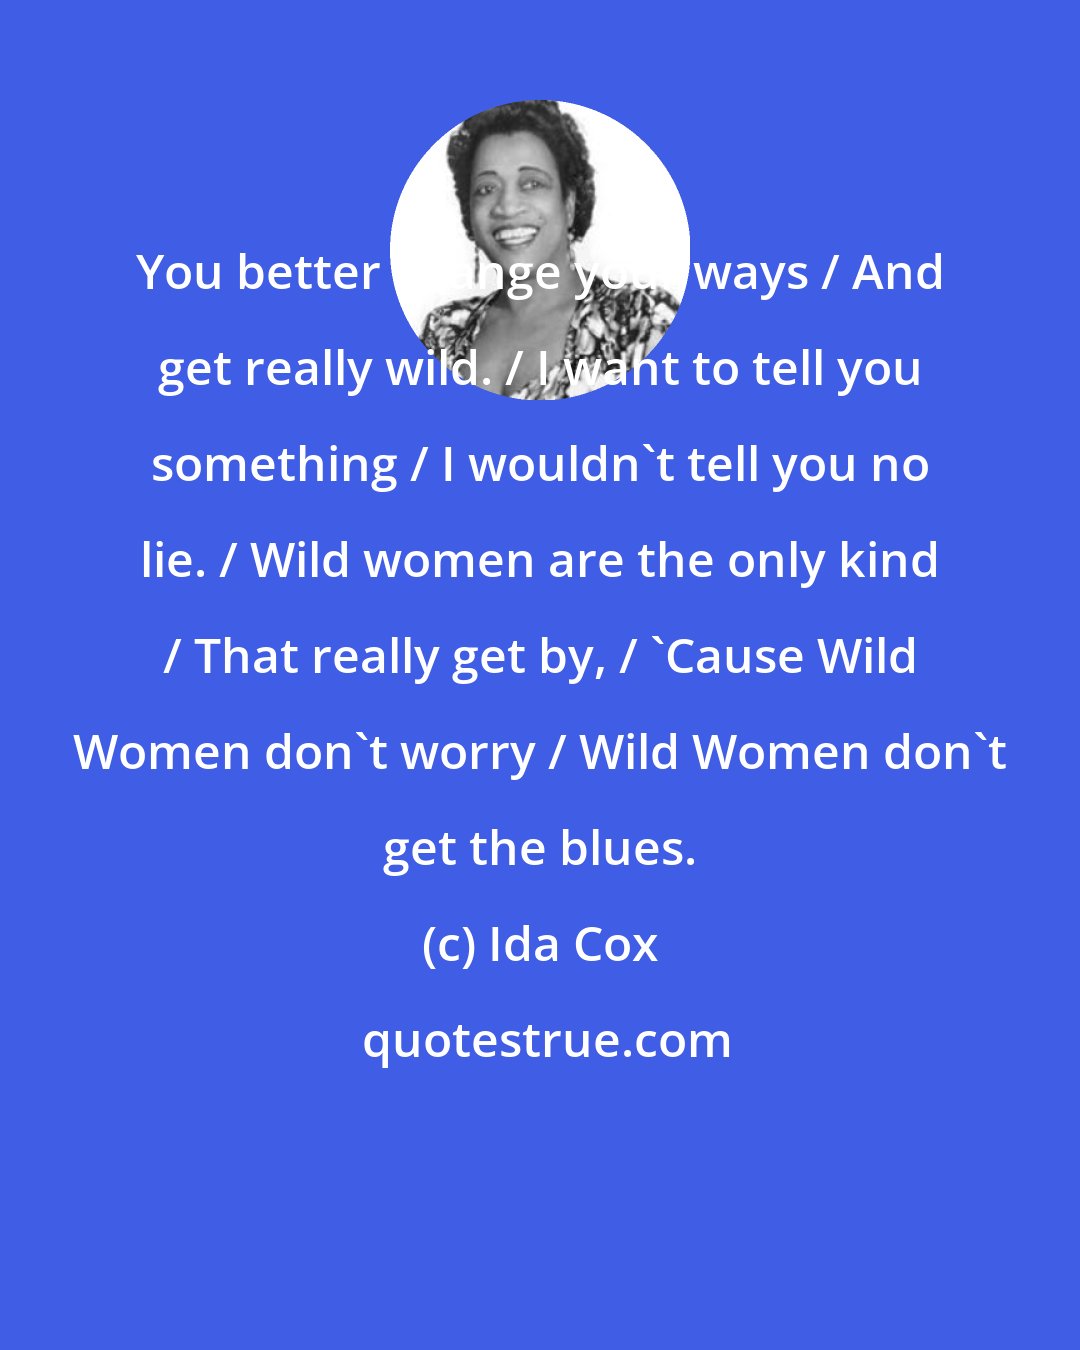 Ida Cox: You better change your ways / And get really wild. / I want to tell you something / I wouldn't tell you no lie. / Wild women are the only kind / That really get by, / 'Cause Wild Women don't worry / Wild Women don't get the blues.